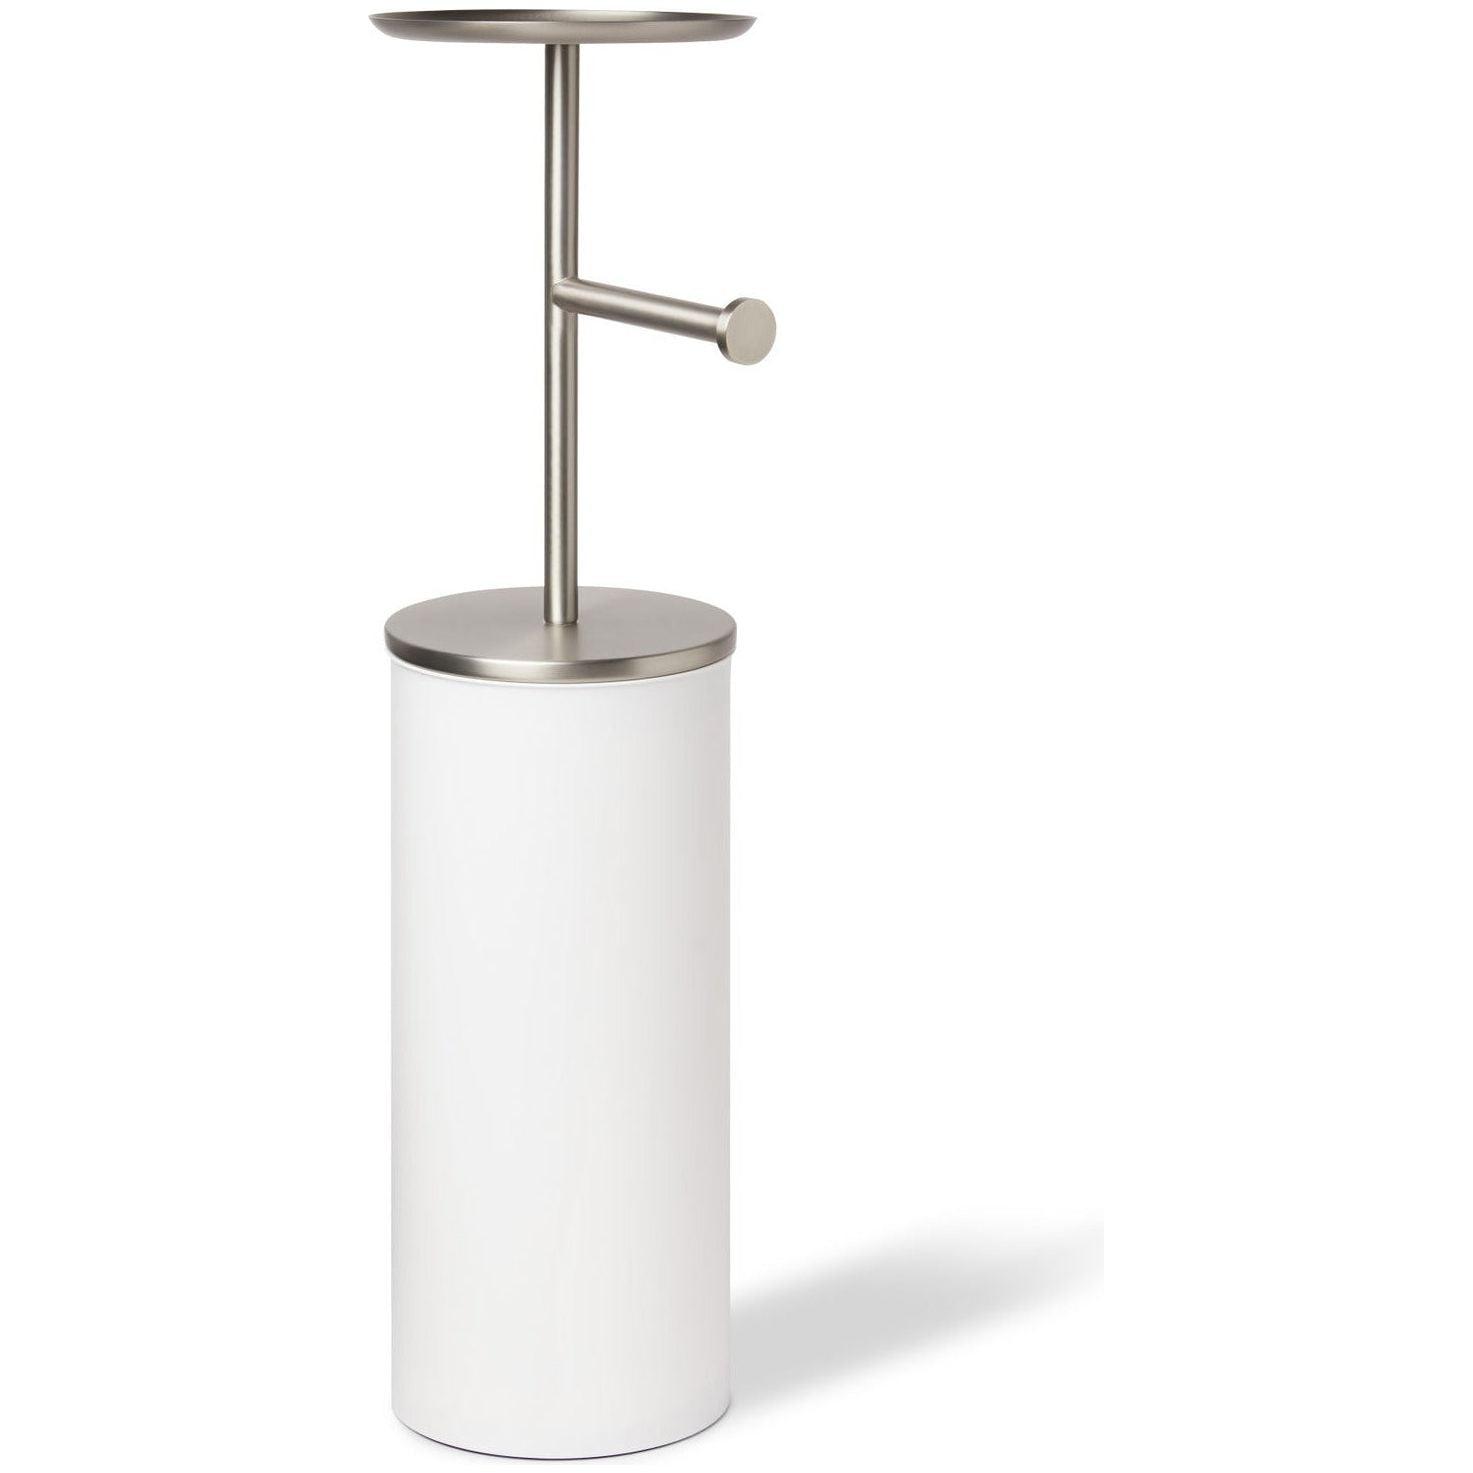 Umbra - Portaloo Toilet Paper Stand and Storage - Lights Canada